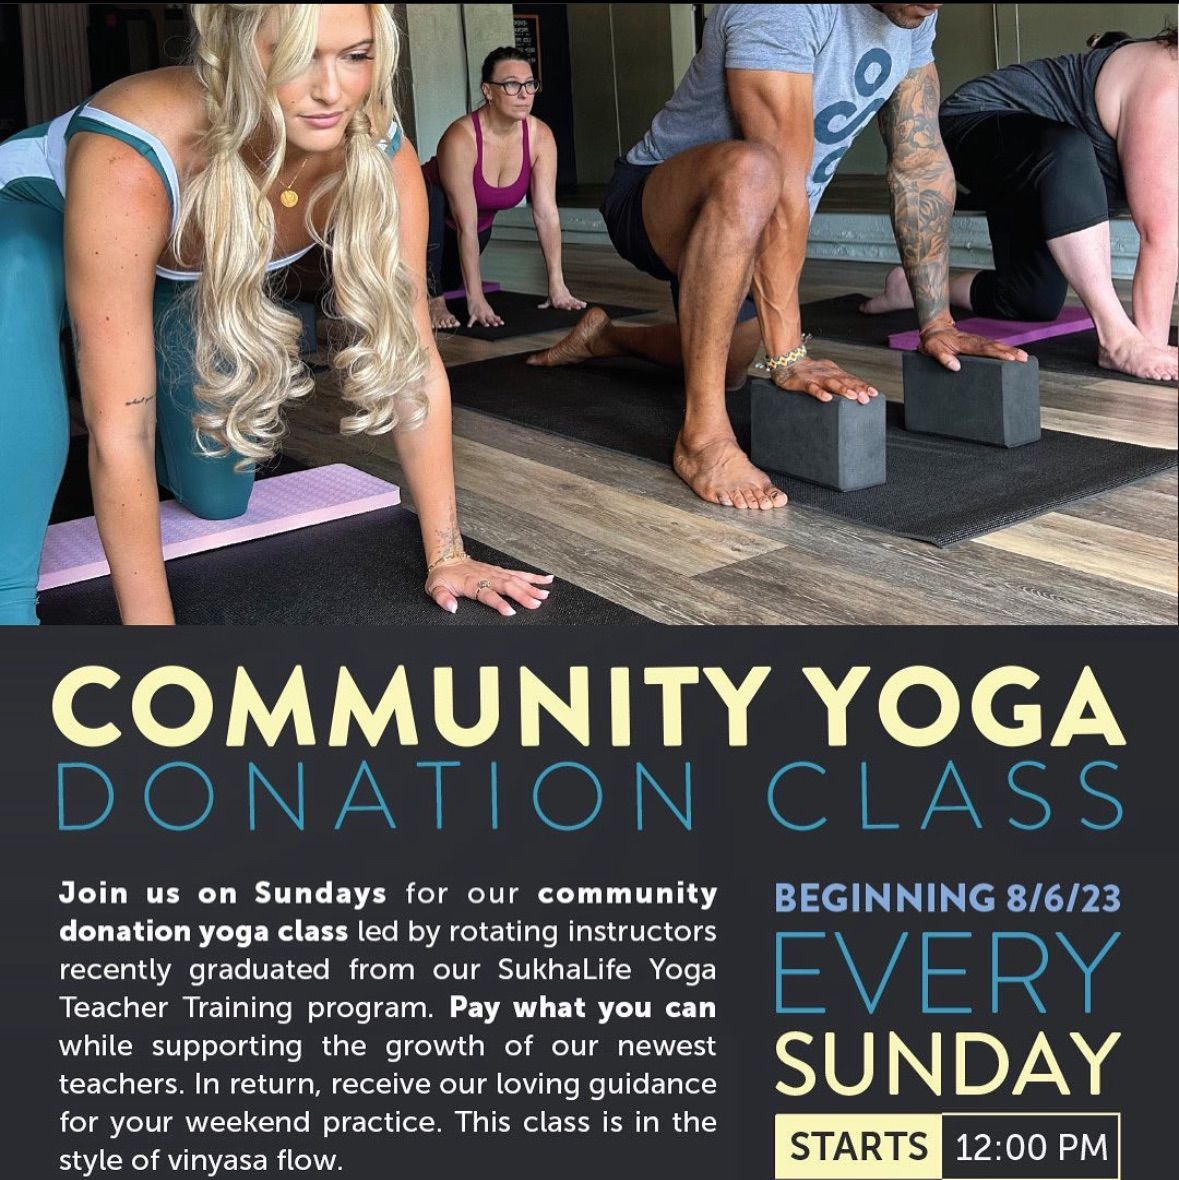 Yoga By Donation - Pay What You Can - Every Sunday